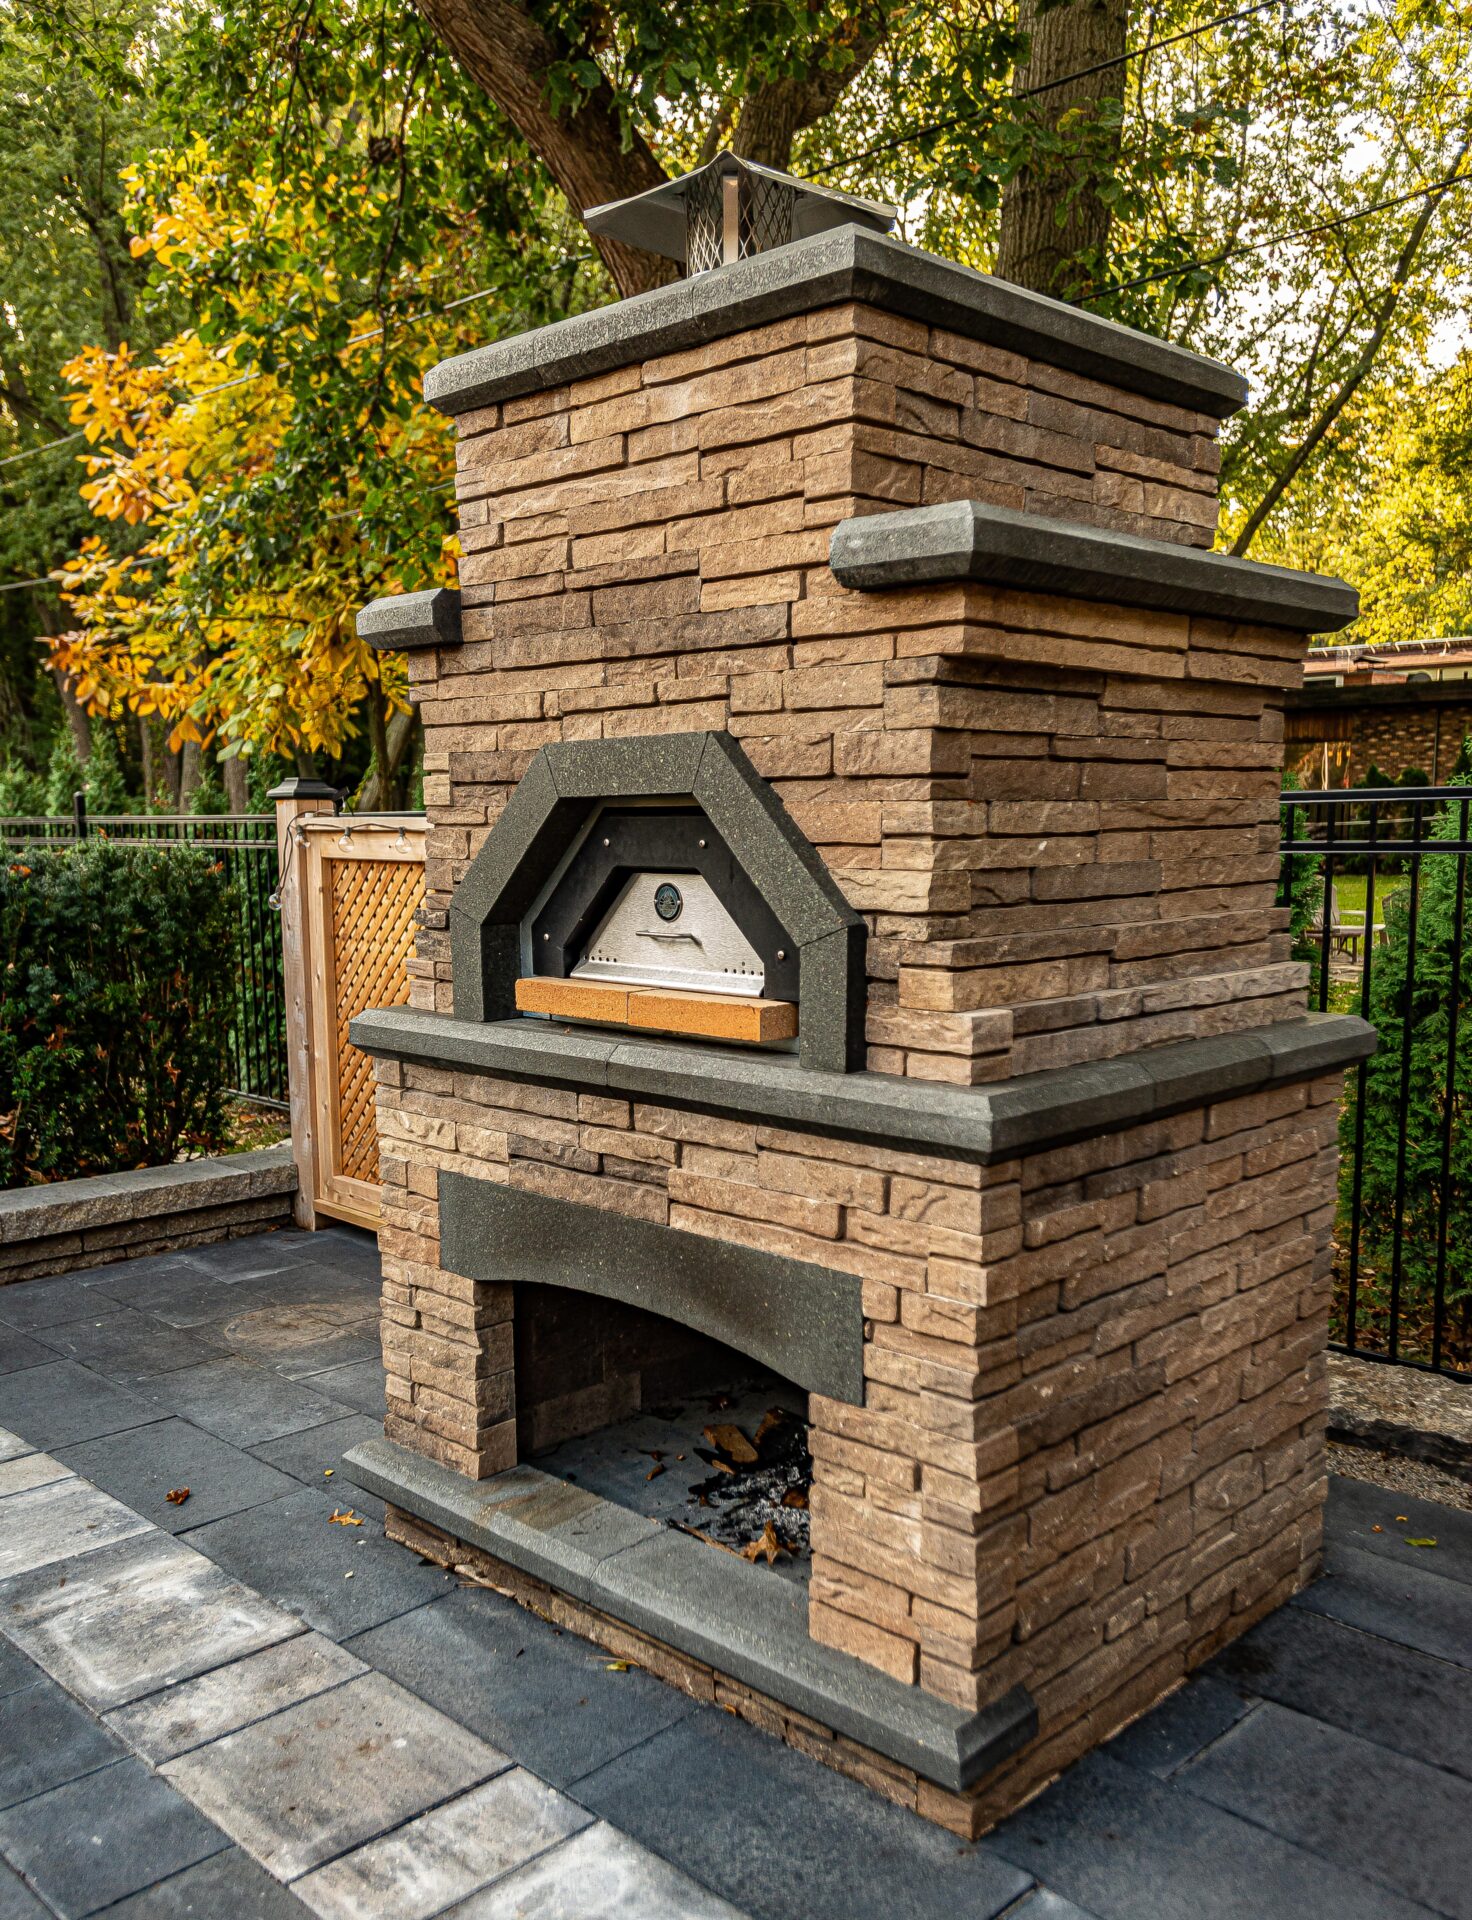 An outdoor stone pizza oven with a chimney stands on a patterned pavement, surrounded by a wooden fence and trees with autumn leaves.